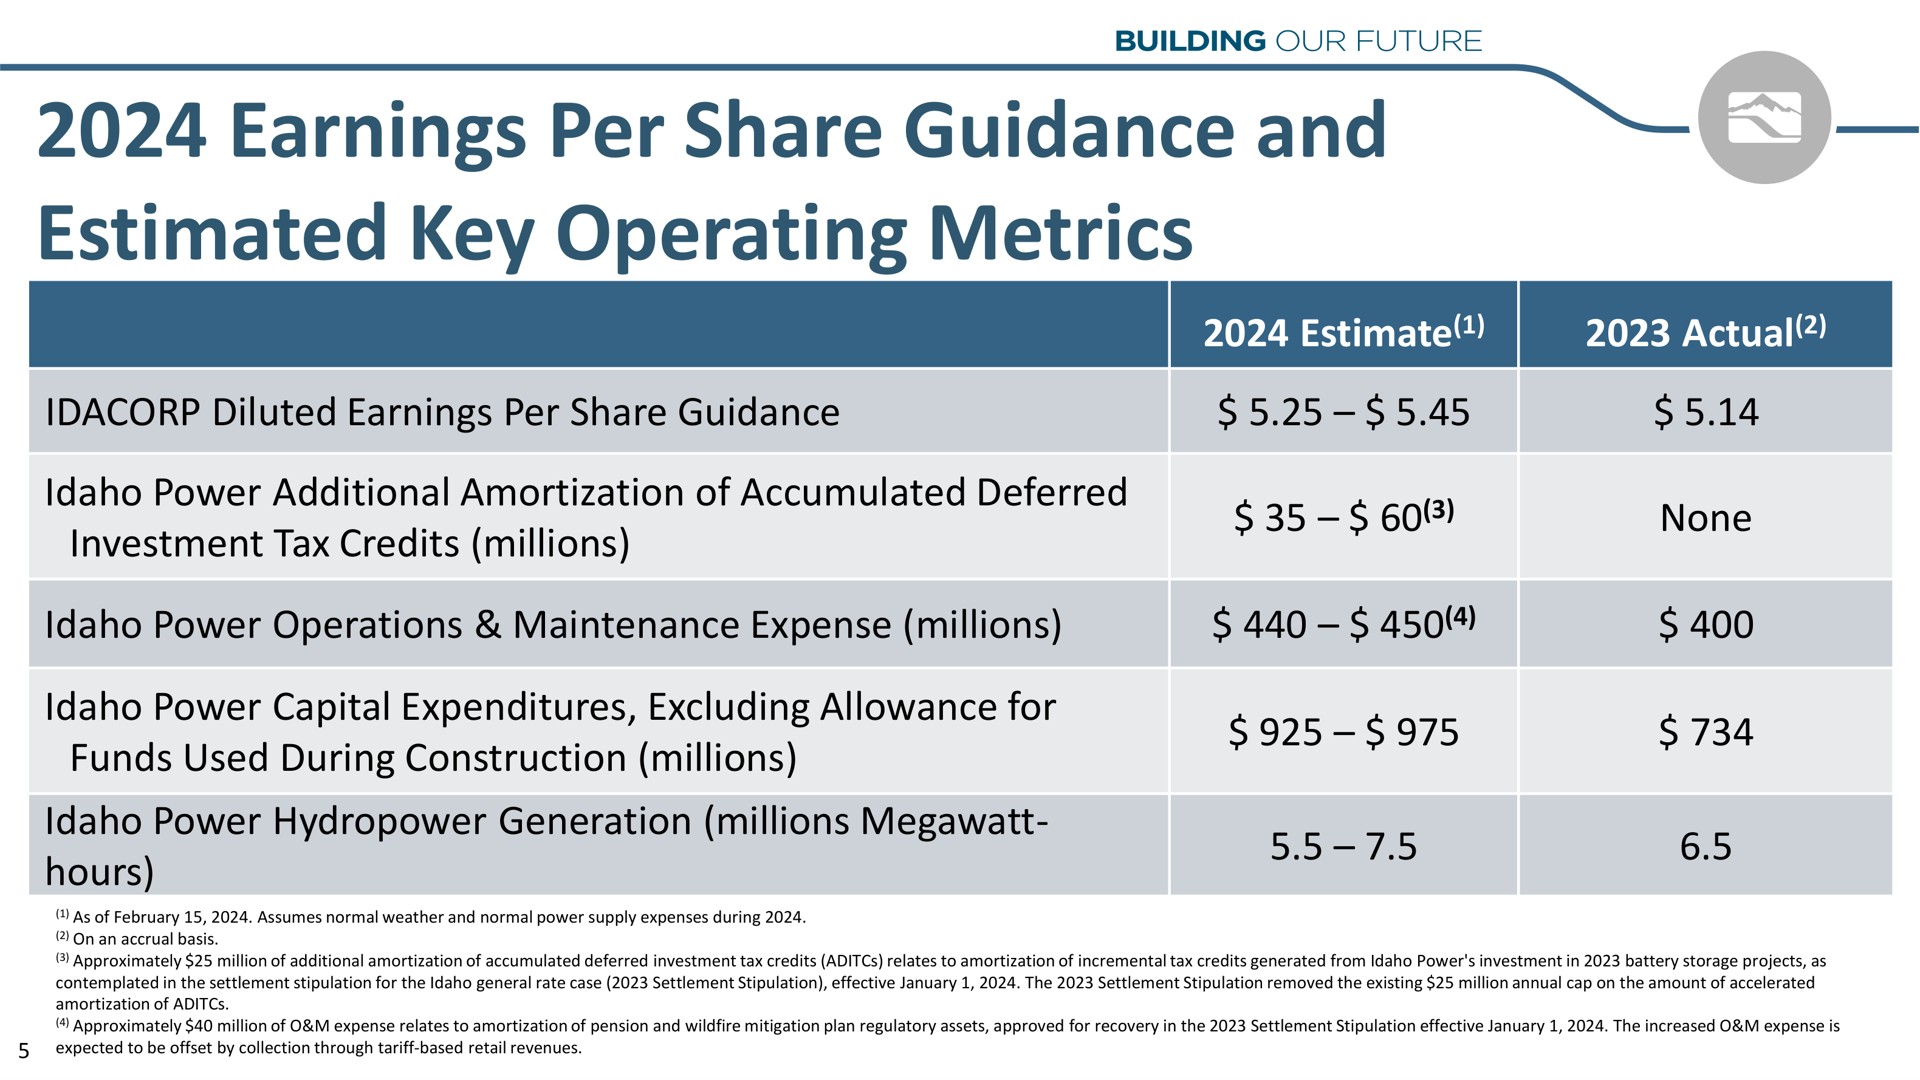 earnings per share guidance and estimated key operating metrics go | Idacorp